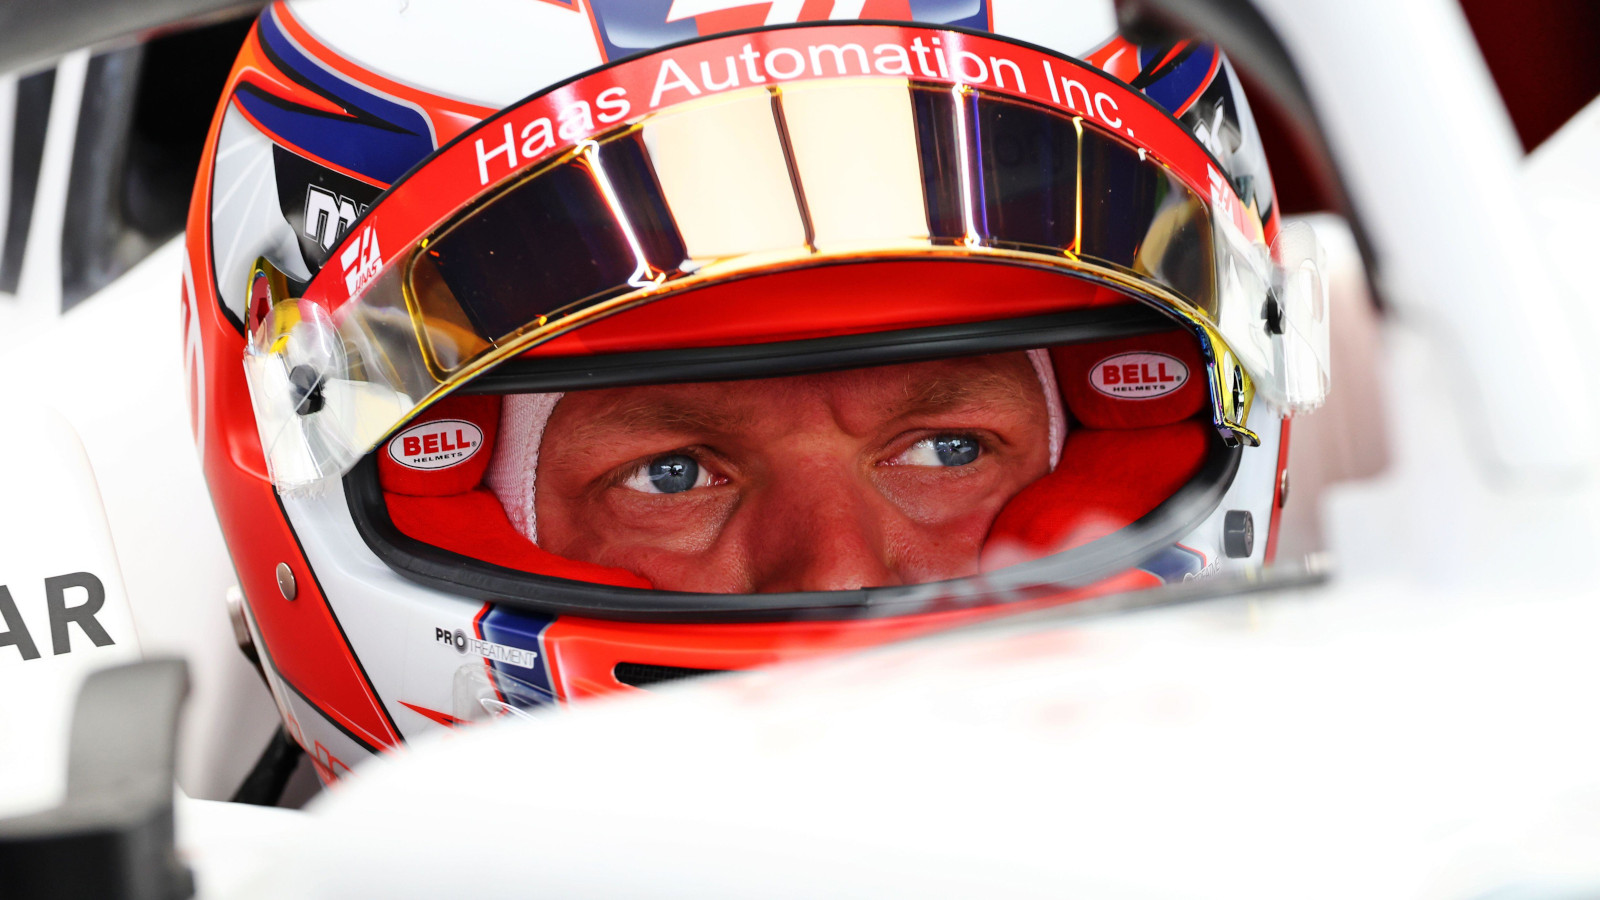 Kevin Magnussen up close with his visor raised. Silverstone July 2022